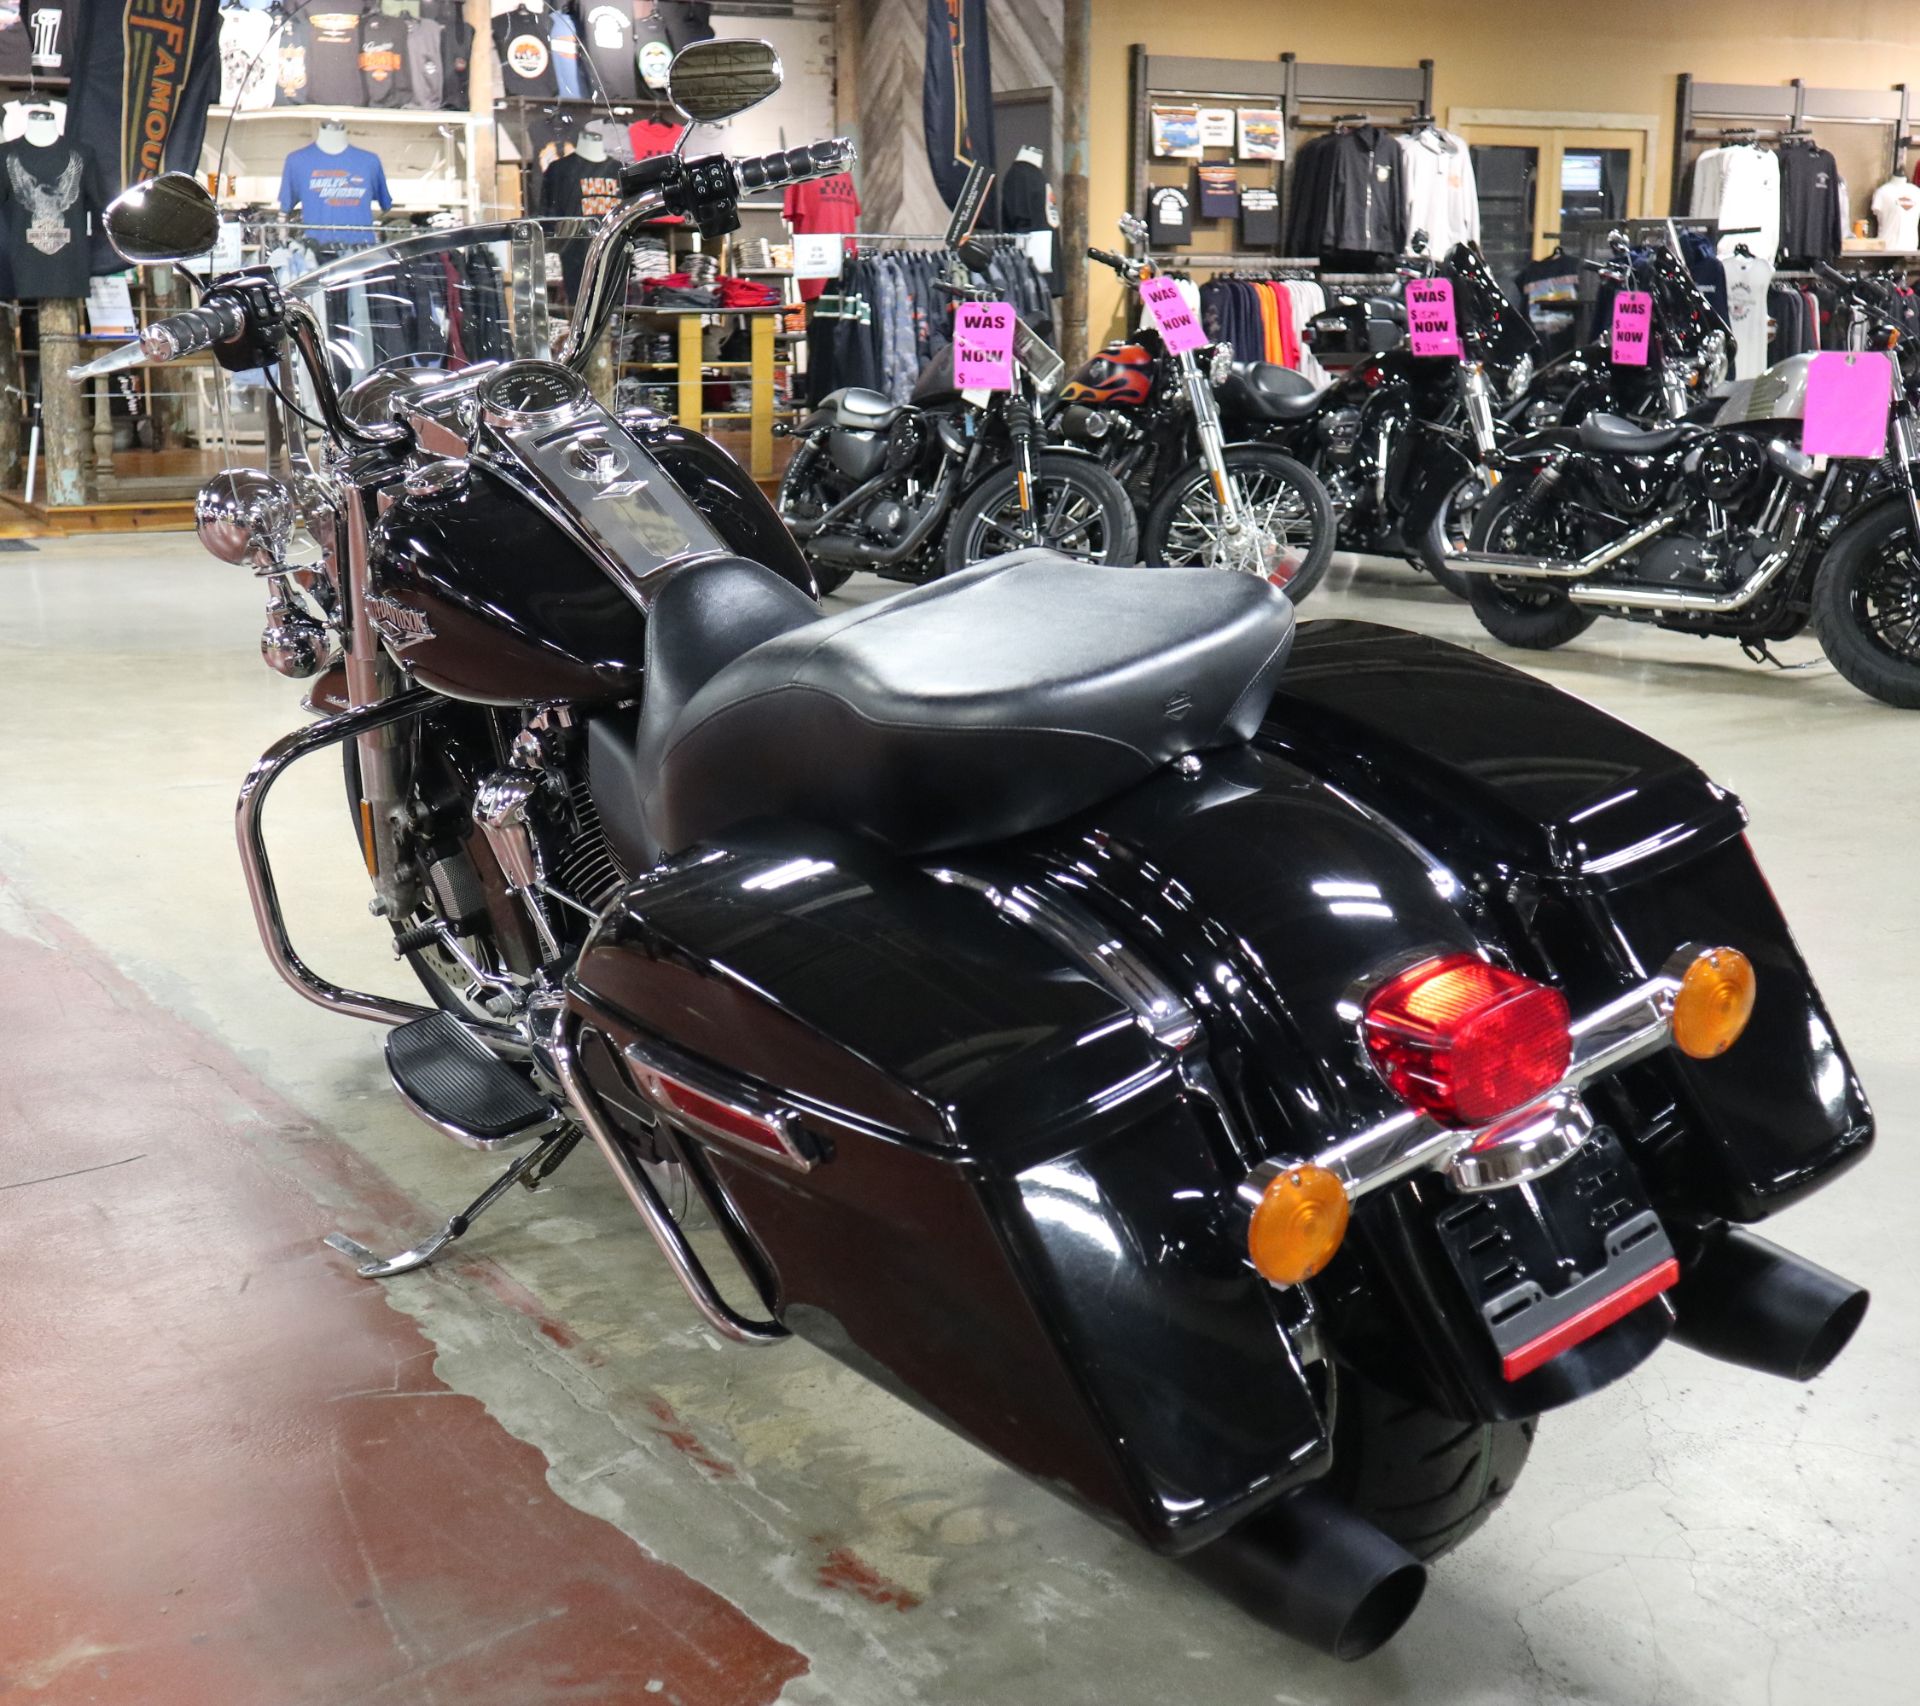 2018 Harley-Davidson Road King® in New London, Connecticut - Photo 5